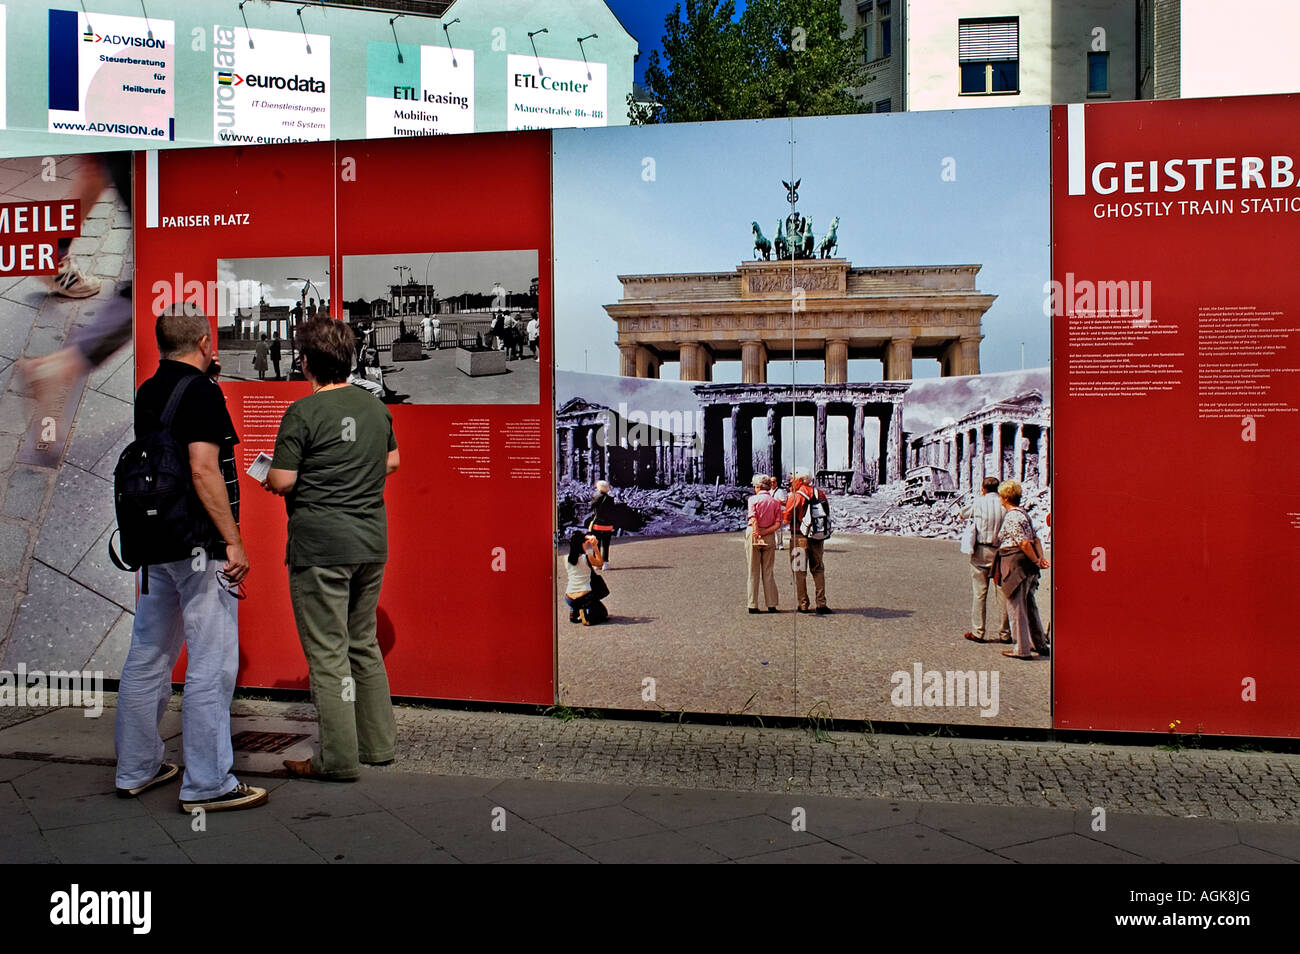 Checkpoint Charlie ( Checkpoint C ) was the best-known Berlin Wall crossing point between East Berlin and West Berlin during the Stock Photo